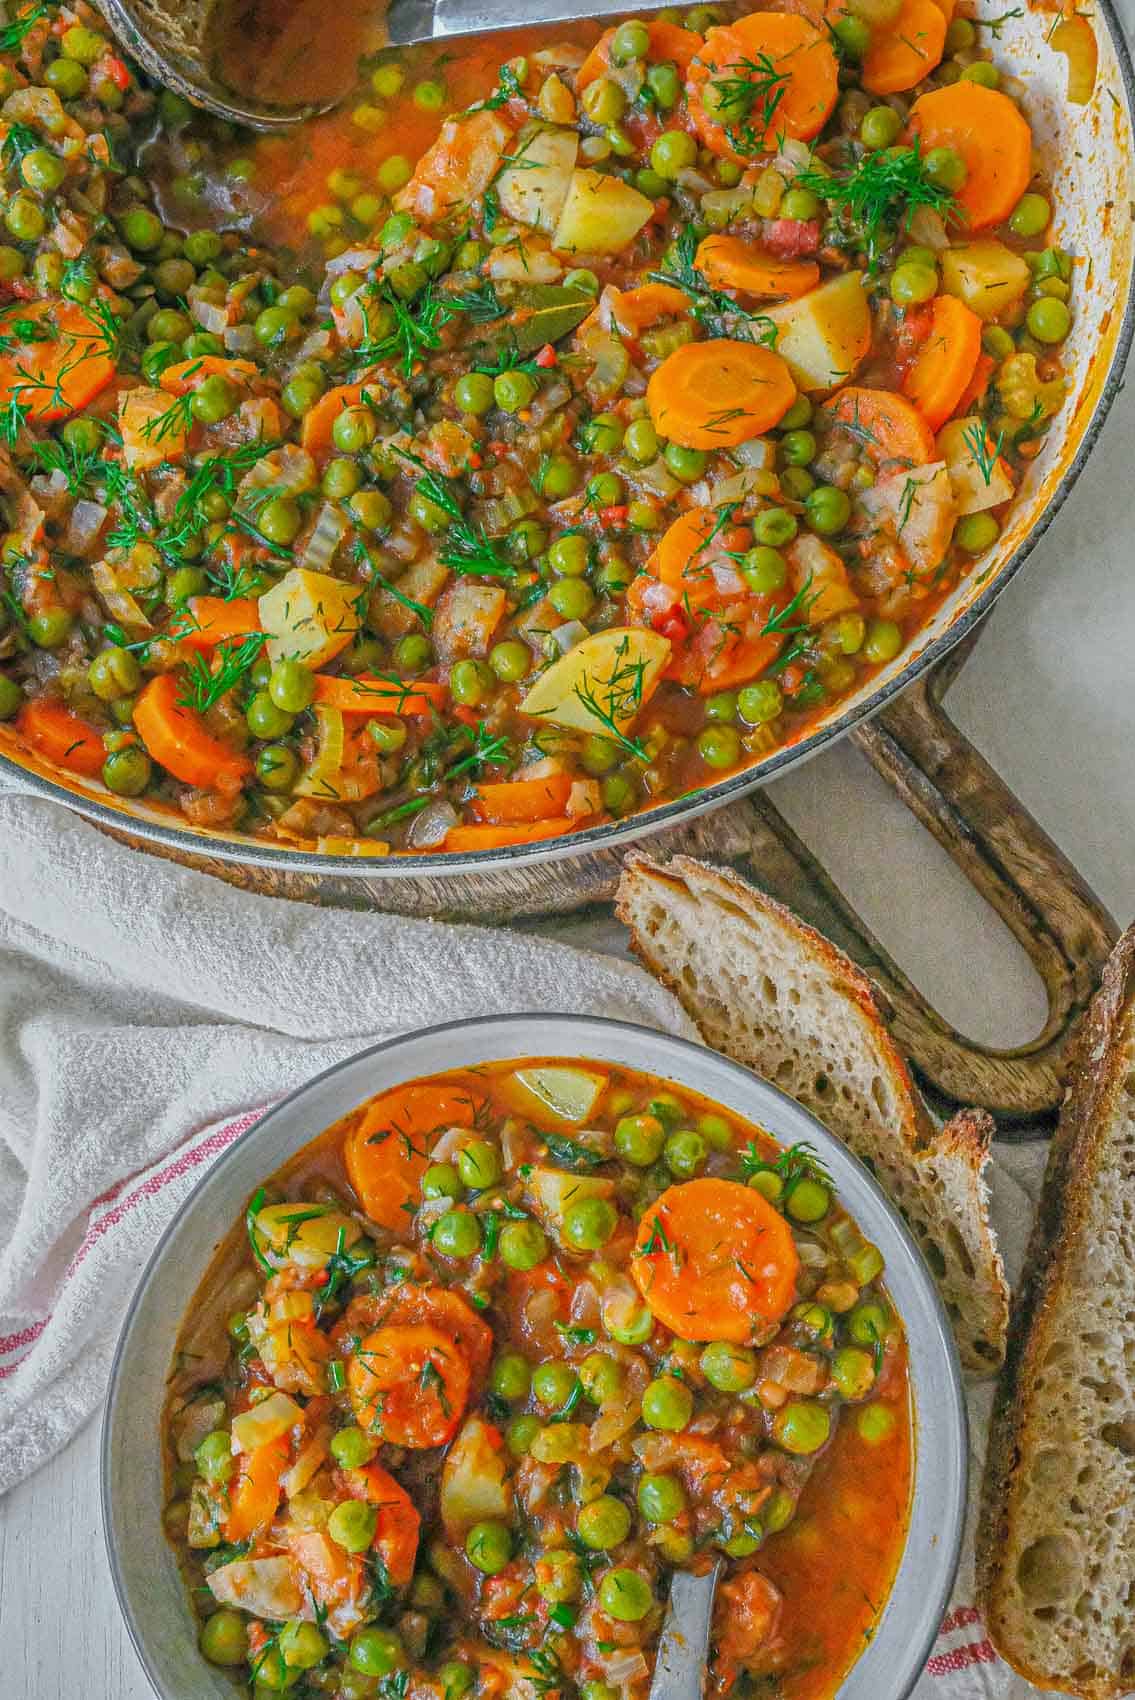 Romanian green pea stew served in a bowl with bread.